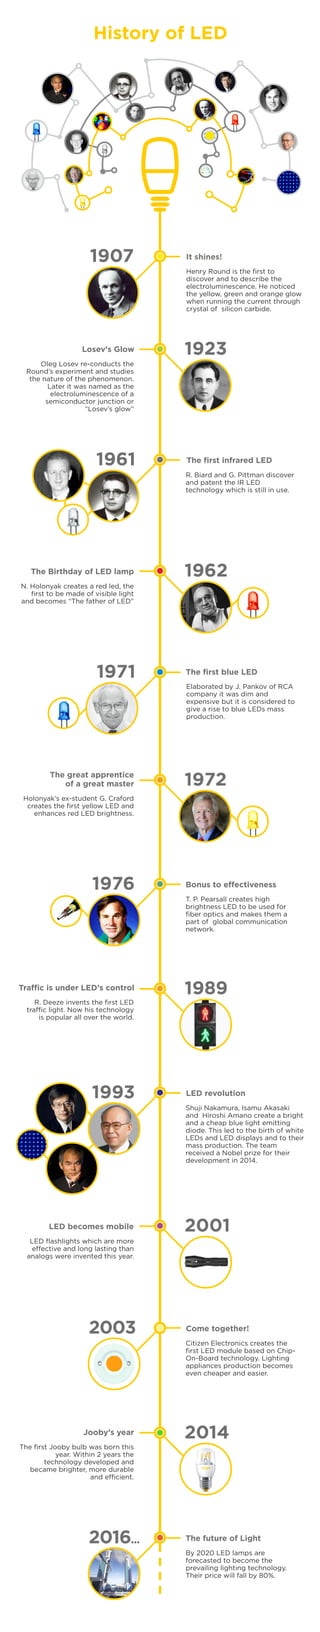 The first Jooby bulb was born this
year. Within 2 years the
technology developed and
became brighter, more durable
and efficient.
1907 It shines!
Henry Round is the first to
discover and to describe the
electroluminescence. He noticed
the yellow, green and orange glow
when running the current through
crystal of silicon carbide.
1923Losev’s Glow
Oleg Losev re-conducts the
Round’s experiment and studies
the nature of the phenomenon.
Later it was named as the
electroluminescence of a
semiconductor junction or
“Losev’s glow”
The first infrared LED
R. Biard and G. Pittman discover
and patent the IR LED
technology which is still in use.
1961
The Birthday of LED lamp
N. Holonyak creates a red led, the
first to be made of visible light
and becomes “The father of LED”
1962
The first blue LED
Elaborated by J. Pankov of RCA
company it was dim and
expensive but it is considered to
give a rise to blue LEDs mass
production.
1971
The great apprentice
of a great master
Holonyak’s ex-student G. Craford
creates the first yellow LED and
enhances red LED brightness.
1972
Bonus to effectiveness
T. P. Pearsall creates high
brightness LED to be used for
fiber optics and makes them a
part of global communication
network.
1976
Traffic is under LED’s control
R. Deeze invents the first LED
traffic light. Now his technology
is popular all over the world.
1989
LED revolution
LED becomes mobile
LED flashlights which are more
effective and long lasting than
analogs were invented this year.
Come together!
Citizen Electronics creates the
first LED module based on Chip-
On-Board technology. Lighting
appliances production becomes
even cheaper and easier.
Jooby’s year
The future of Light
By 2020 LED lamps are
forecasted to become the
prevailing lighting technology.
Their price will fall by 80%.
1993
Shuji Nakamura, Isamu Akasaki
and Hiroshi Amano create a bright
and a cheap blue light emitting
diode. This led to the birth of white
LEDs and LED displays and to their
mass production. The team
received a Nobel prize for their
development in 2014.
2001
2003
2014
2016...
History of LED
 